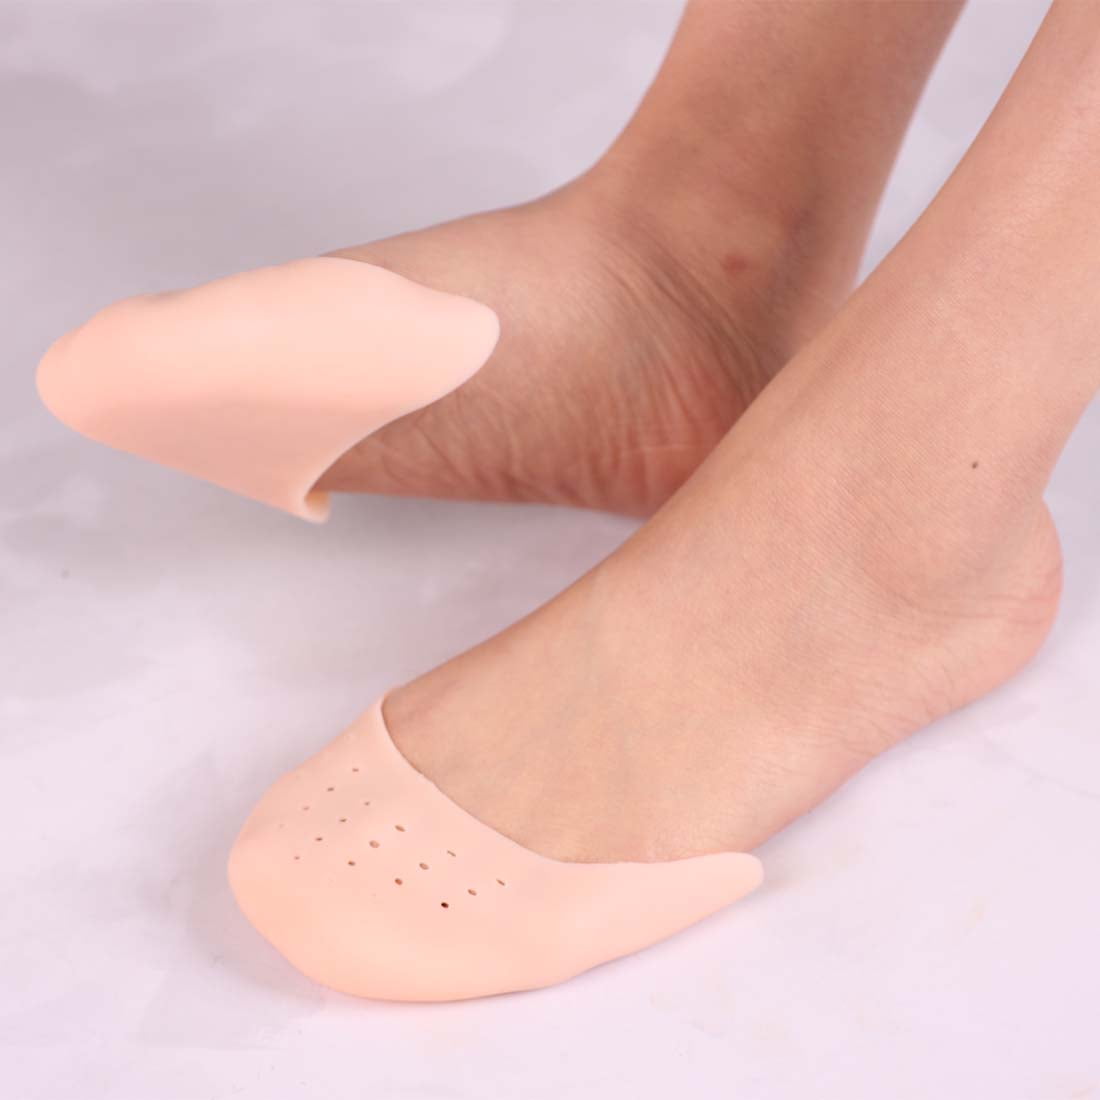 ICYANG 2 Pairs Silicone Ballet Pointe Dance Shoe Gel Toe Cap Cover Protector Foot Care Pads Women Girl 